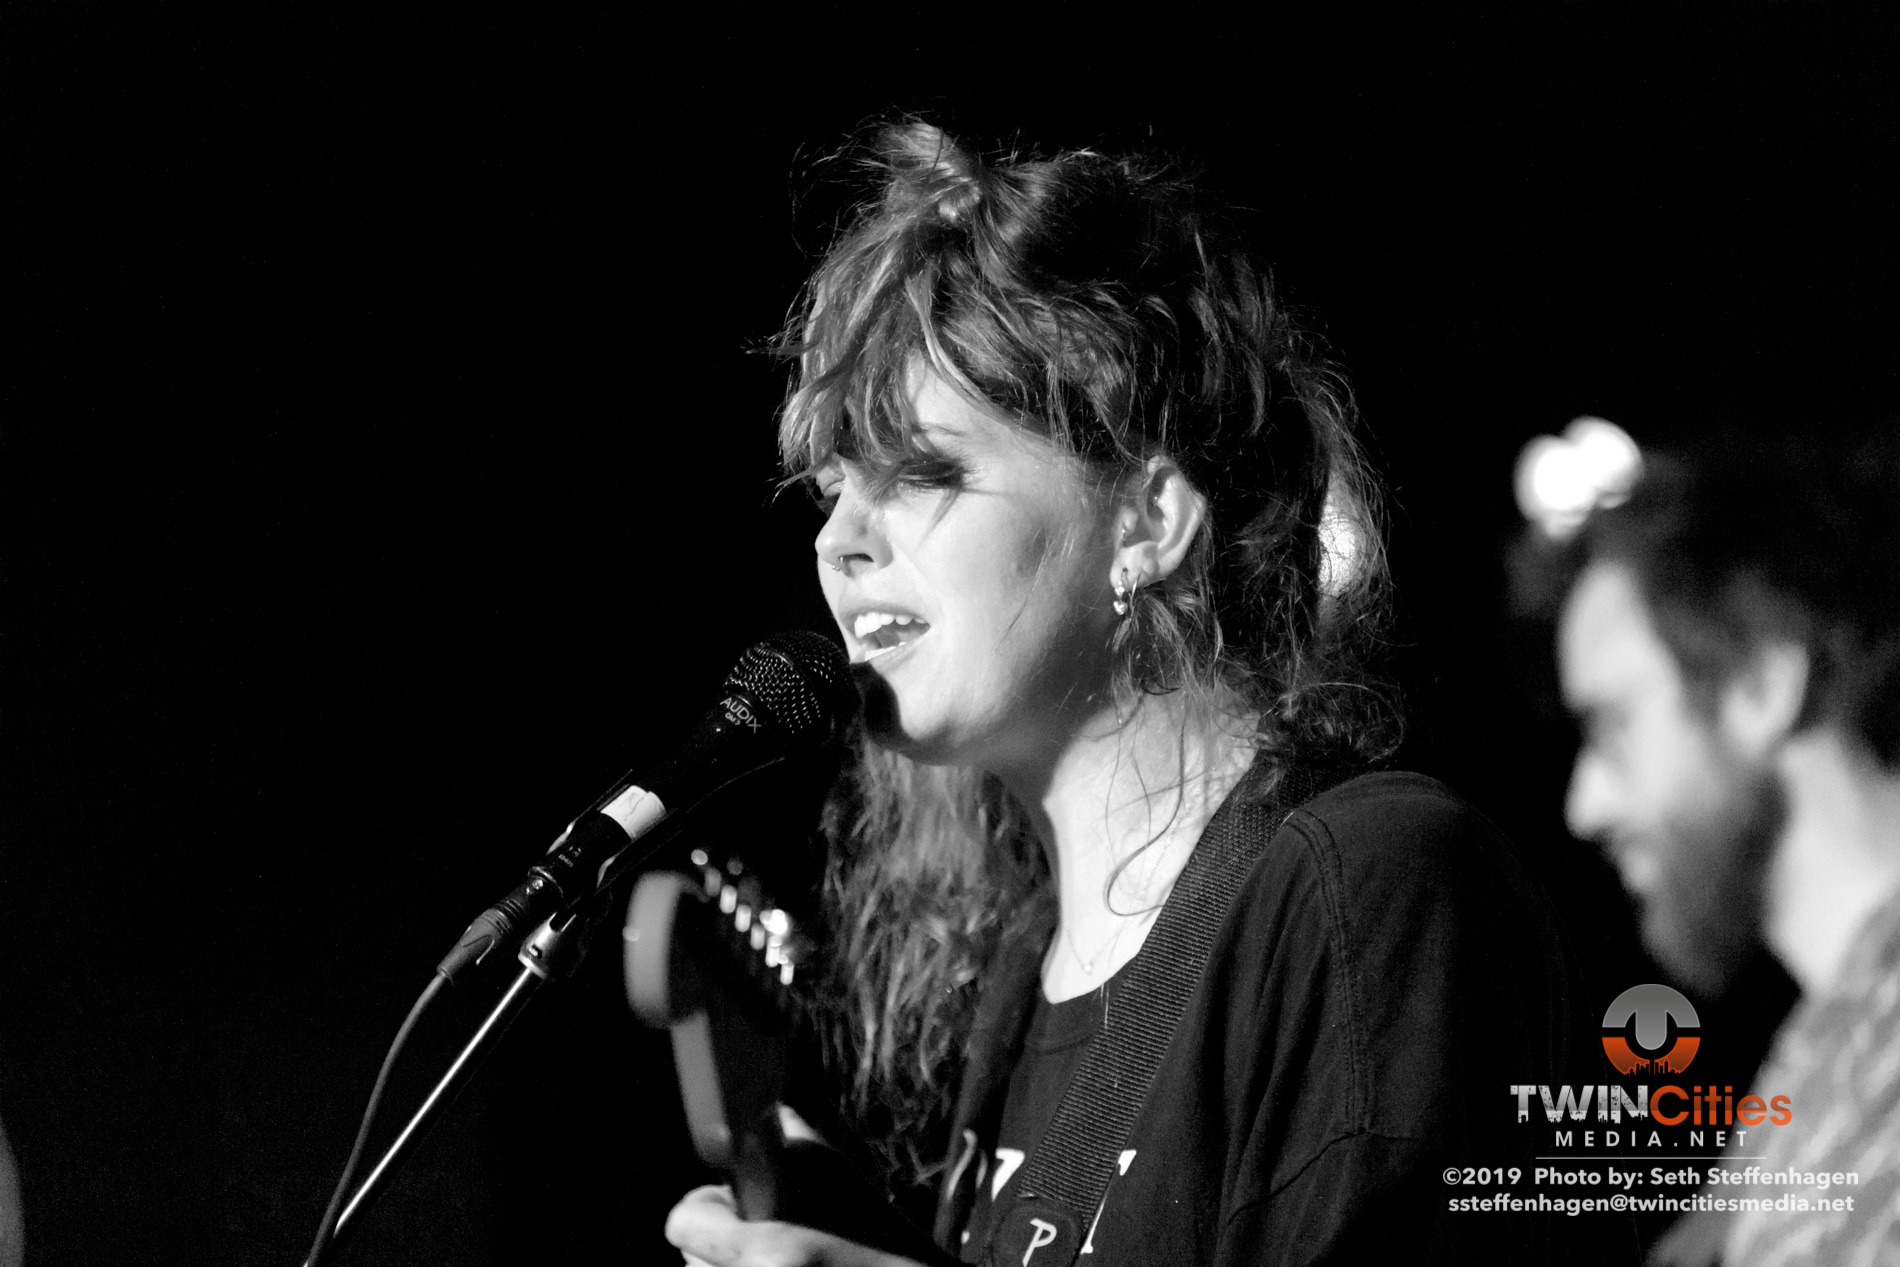 March 27, 2019 - Saint Paul, Minnesota, United States - Thou and Emma Ruth Rundle live in concert at the Turf Club along with False, Gorgus and Without as the openers.

(Photo by Seth Steffenhagen/Steffenhagen Photography)